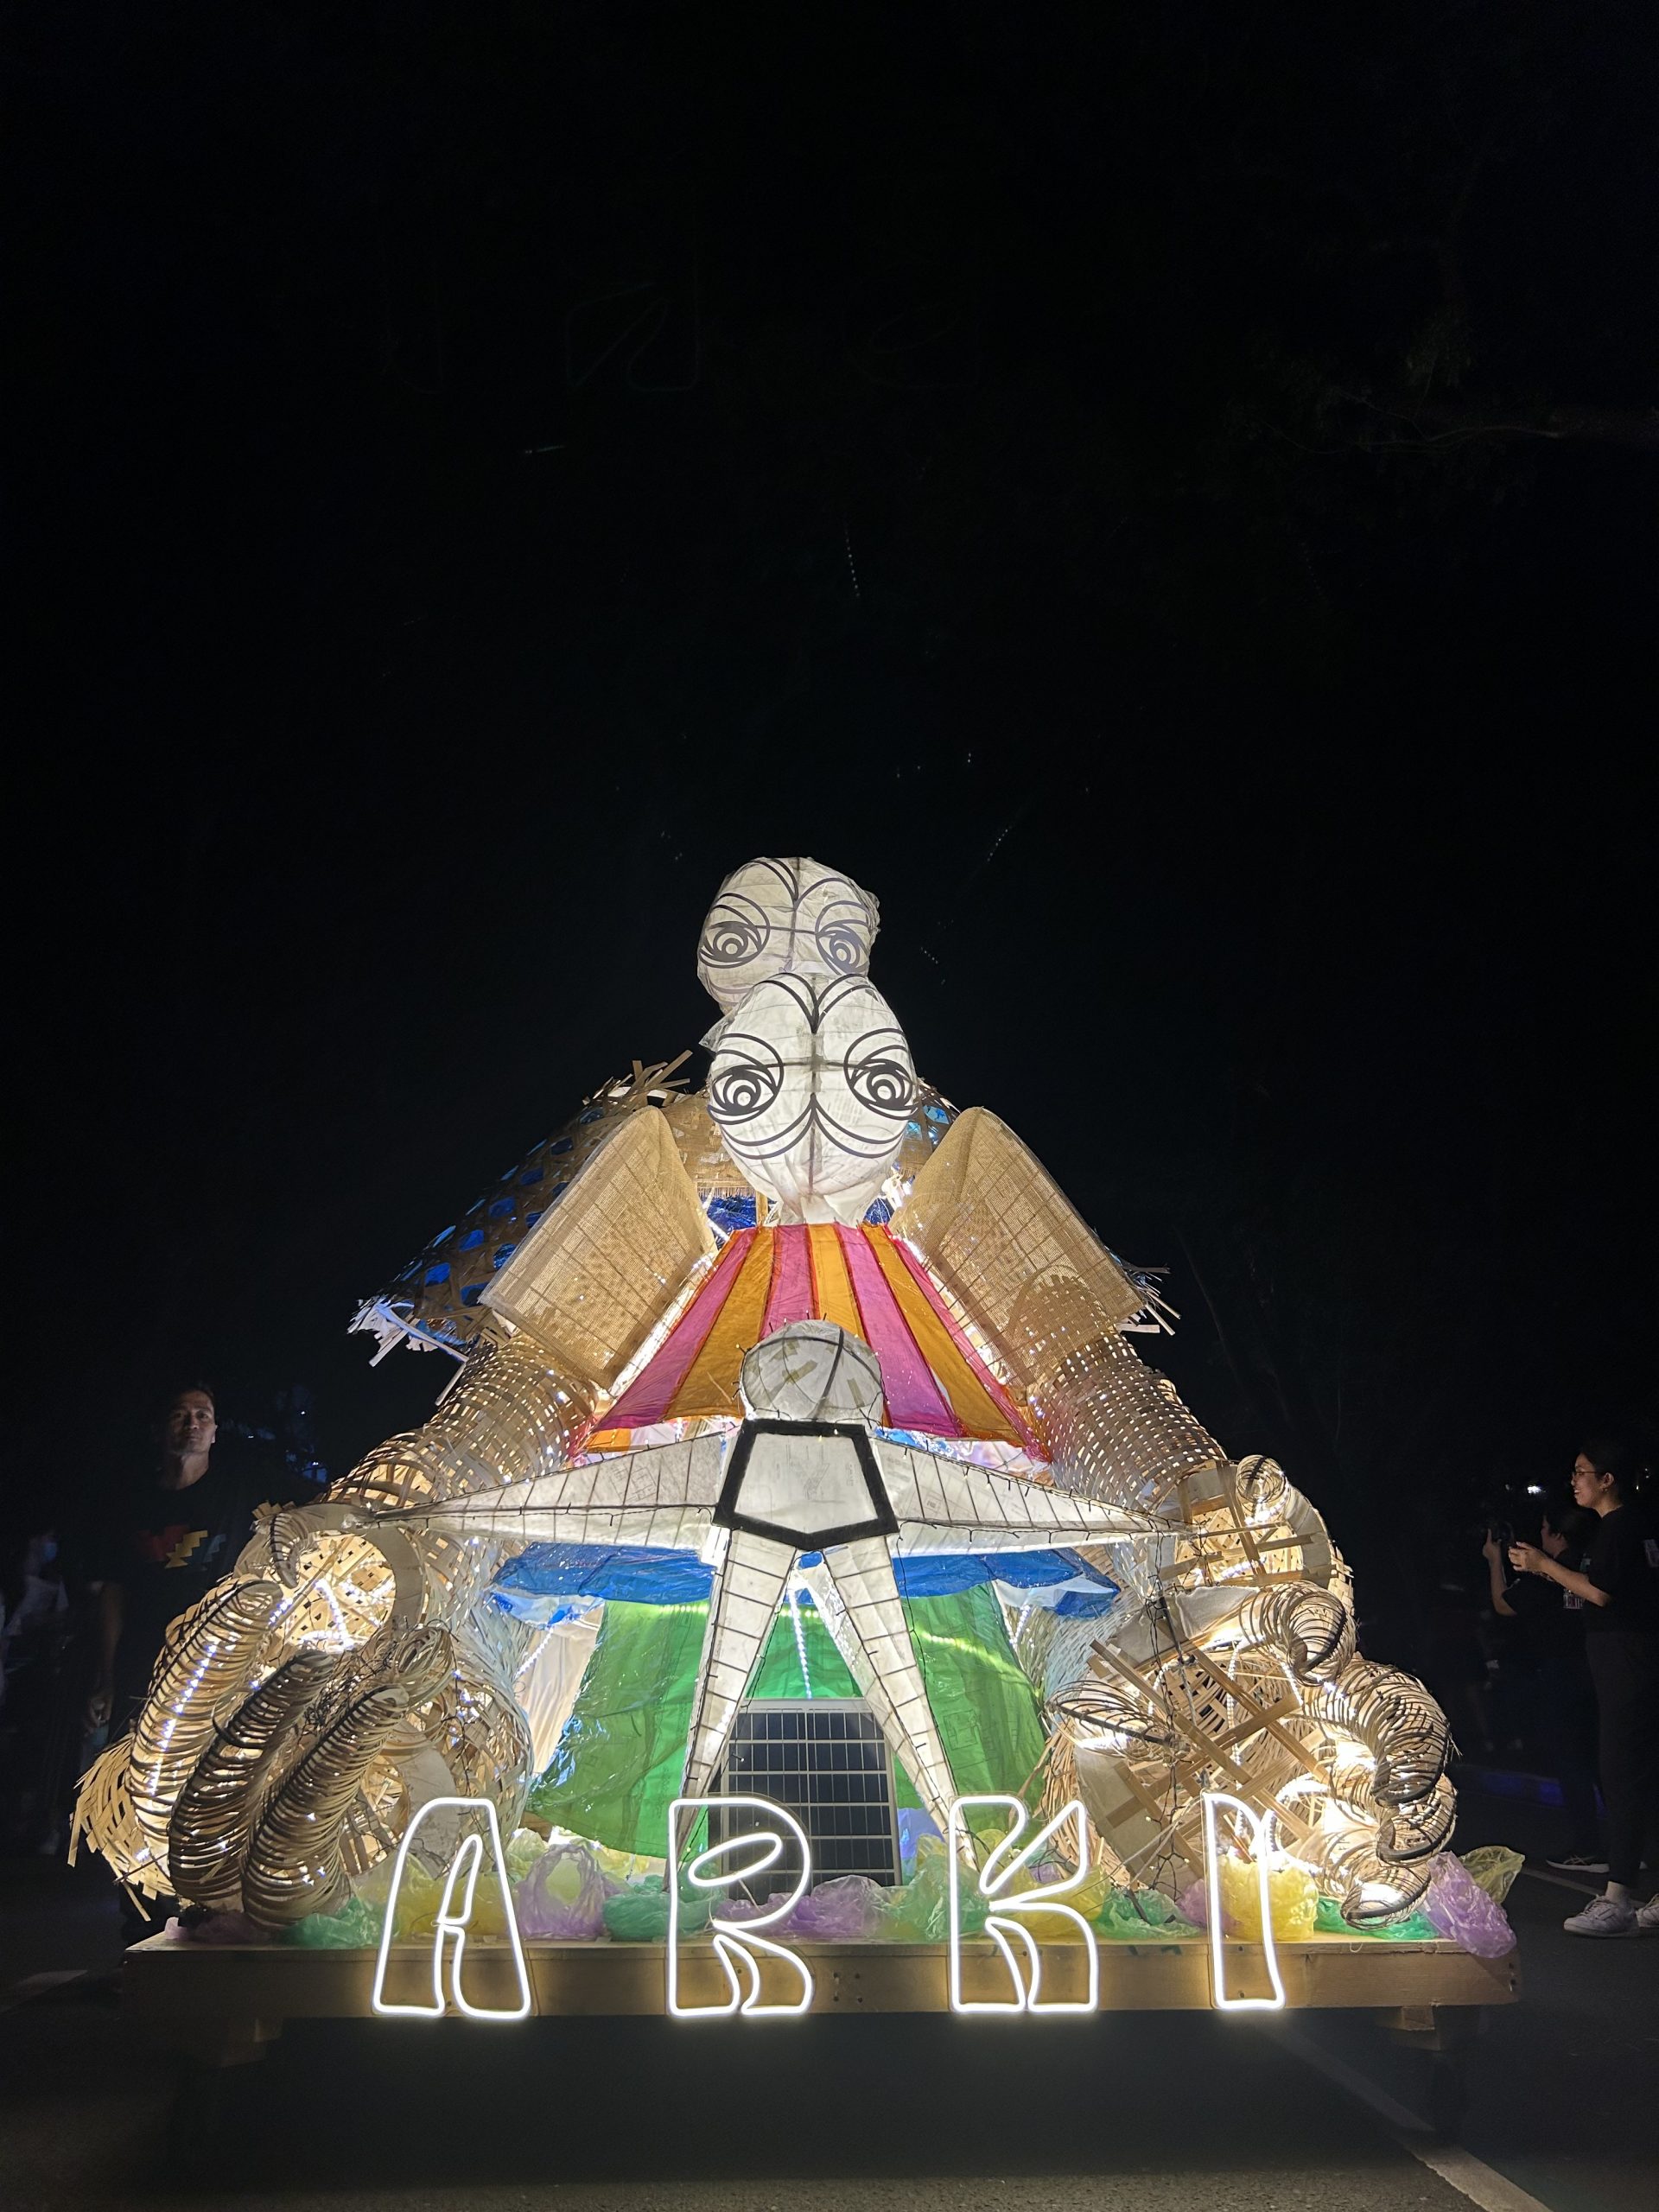 UPCA ranks first in the Academic Units Competition of the UP Diliman Lantern Parade 2023